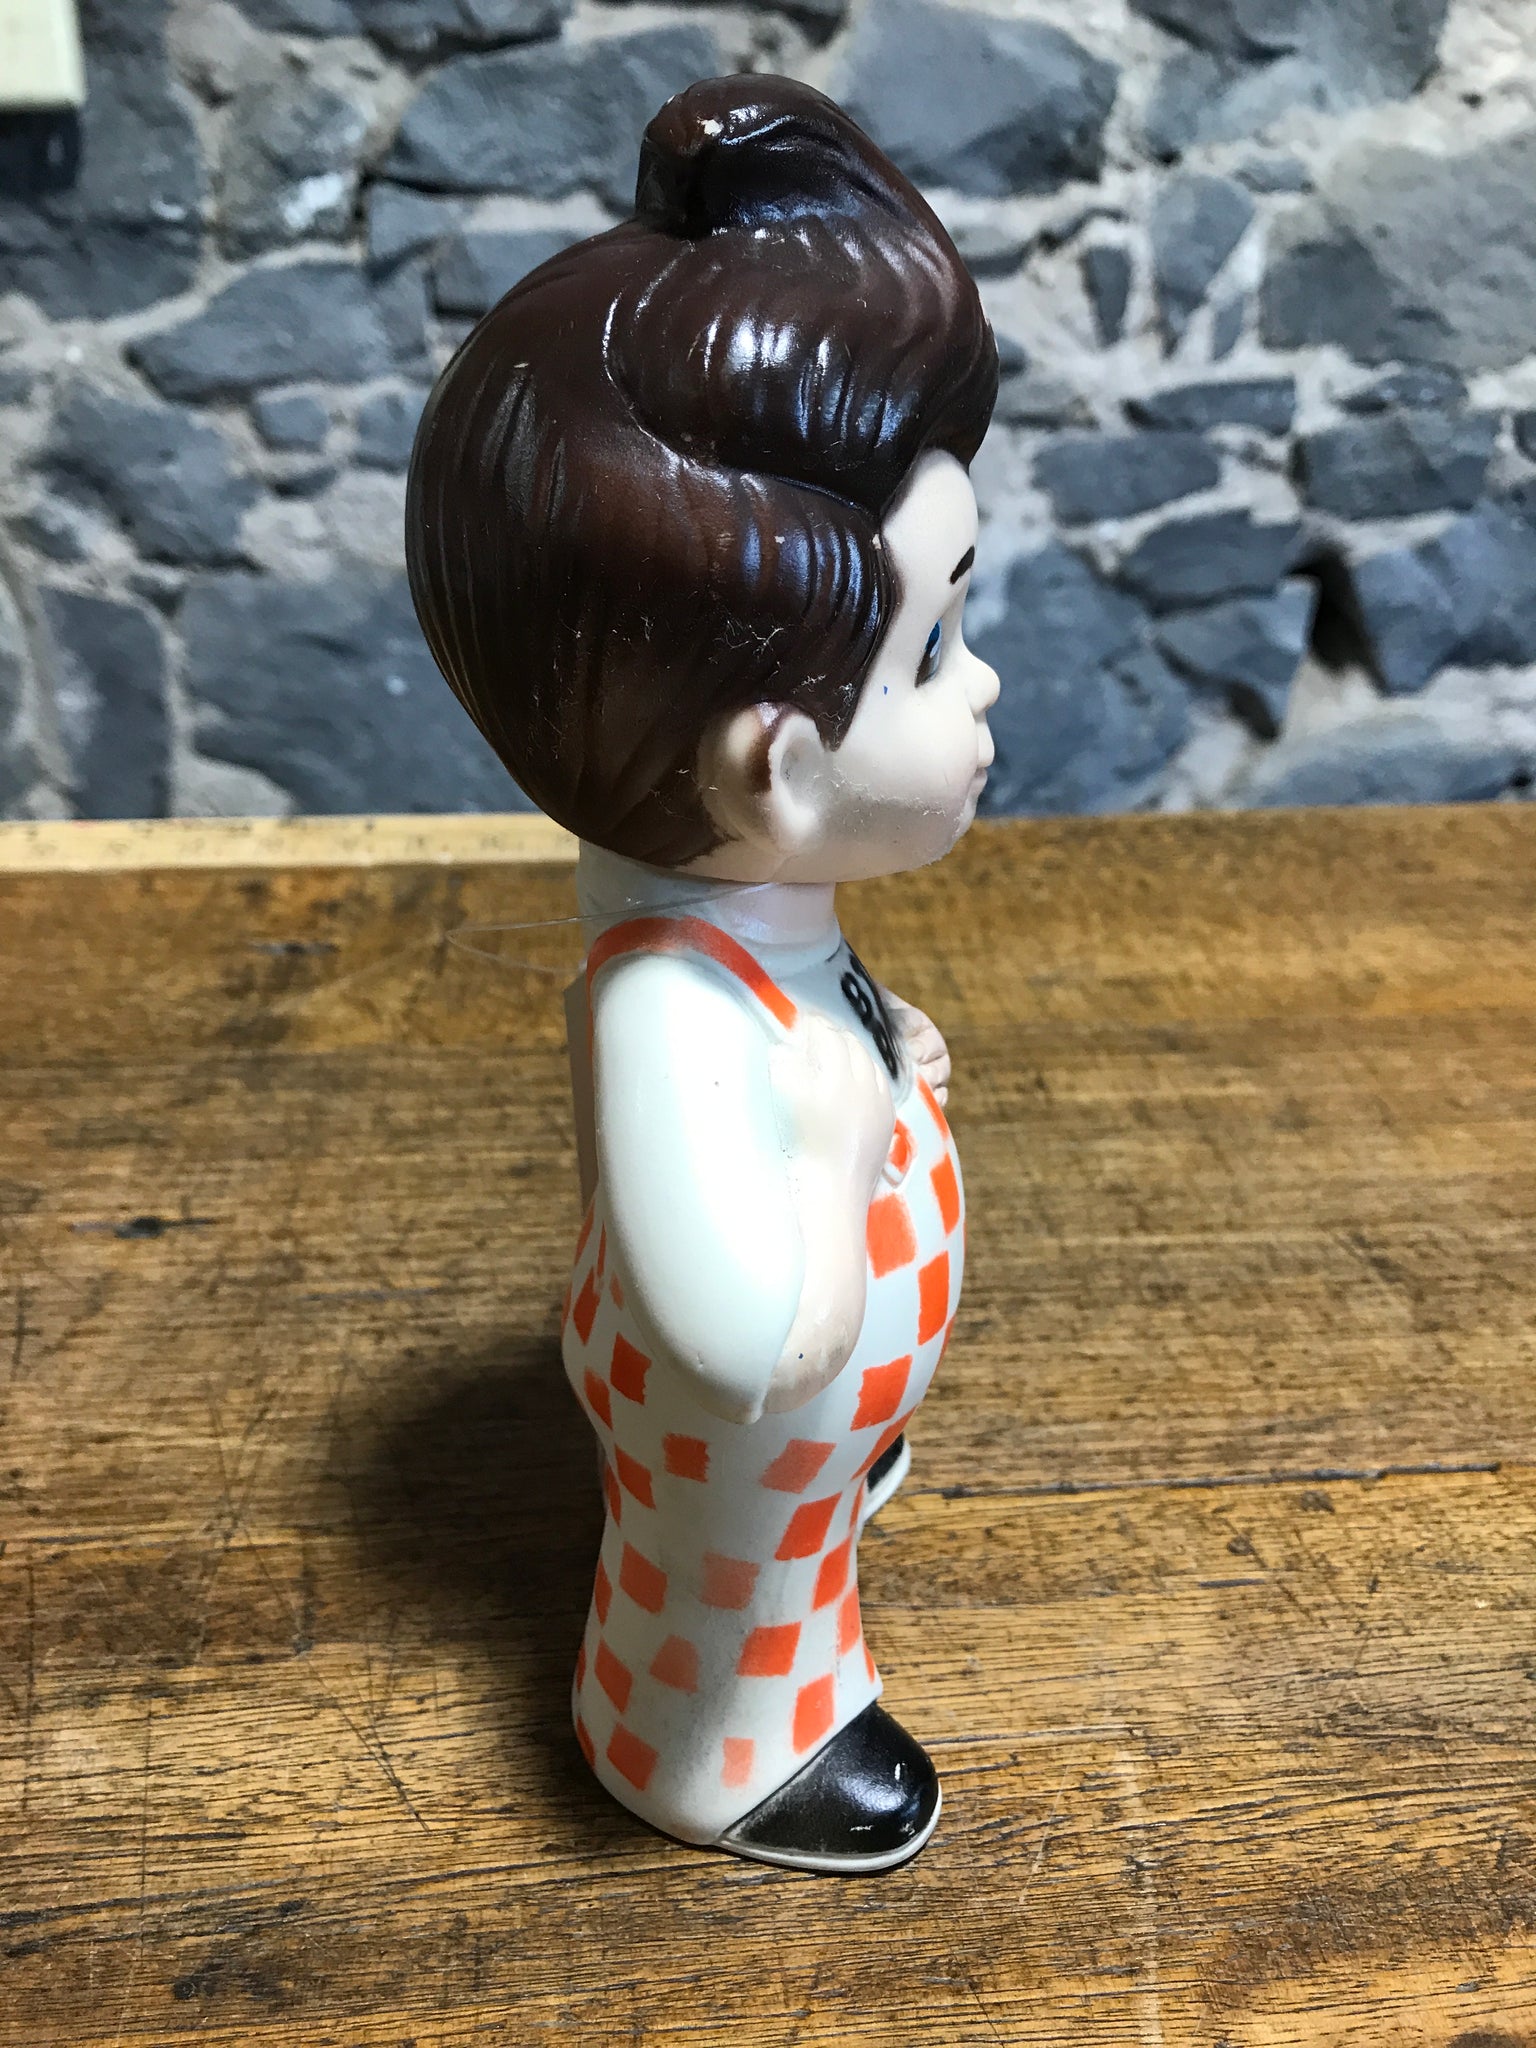 Big Boy Restaurants of America Coin Bank Vintage 1973 Advertising Doll by Marriott Corp.